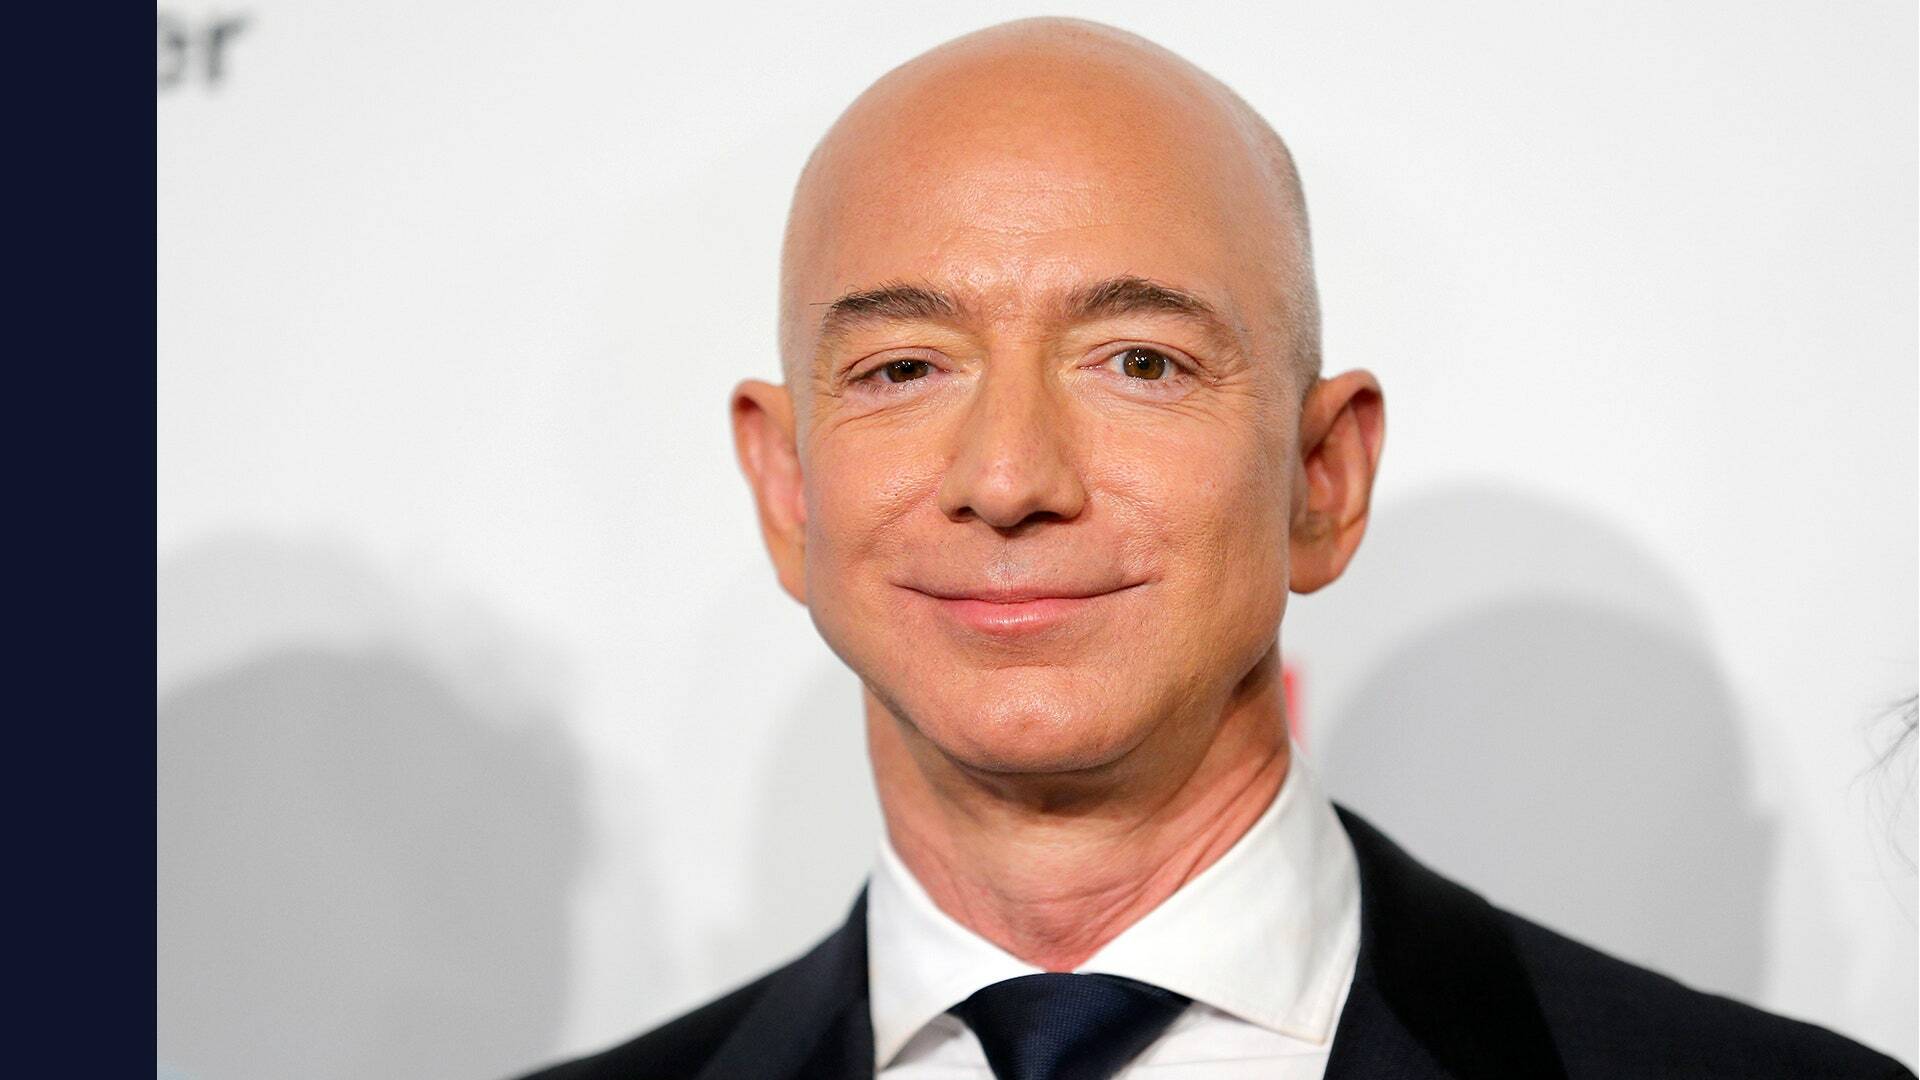 Jeff Bezos: the Richest Person on the Planet! But what's ...